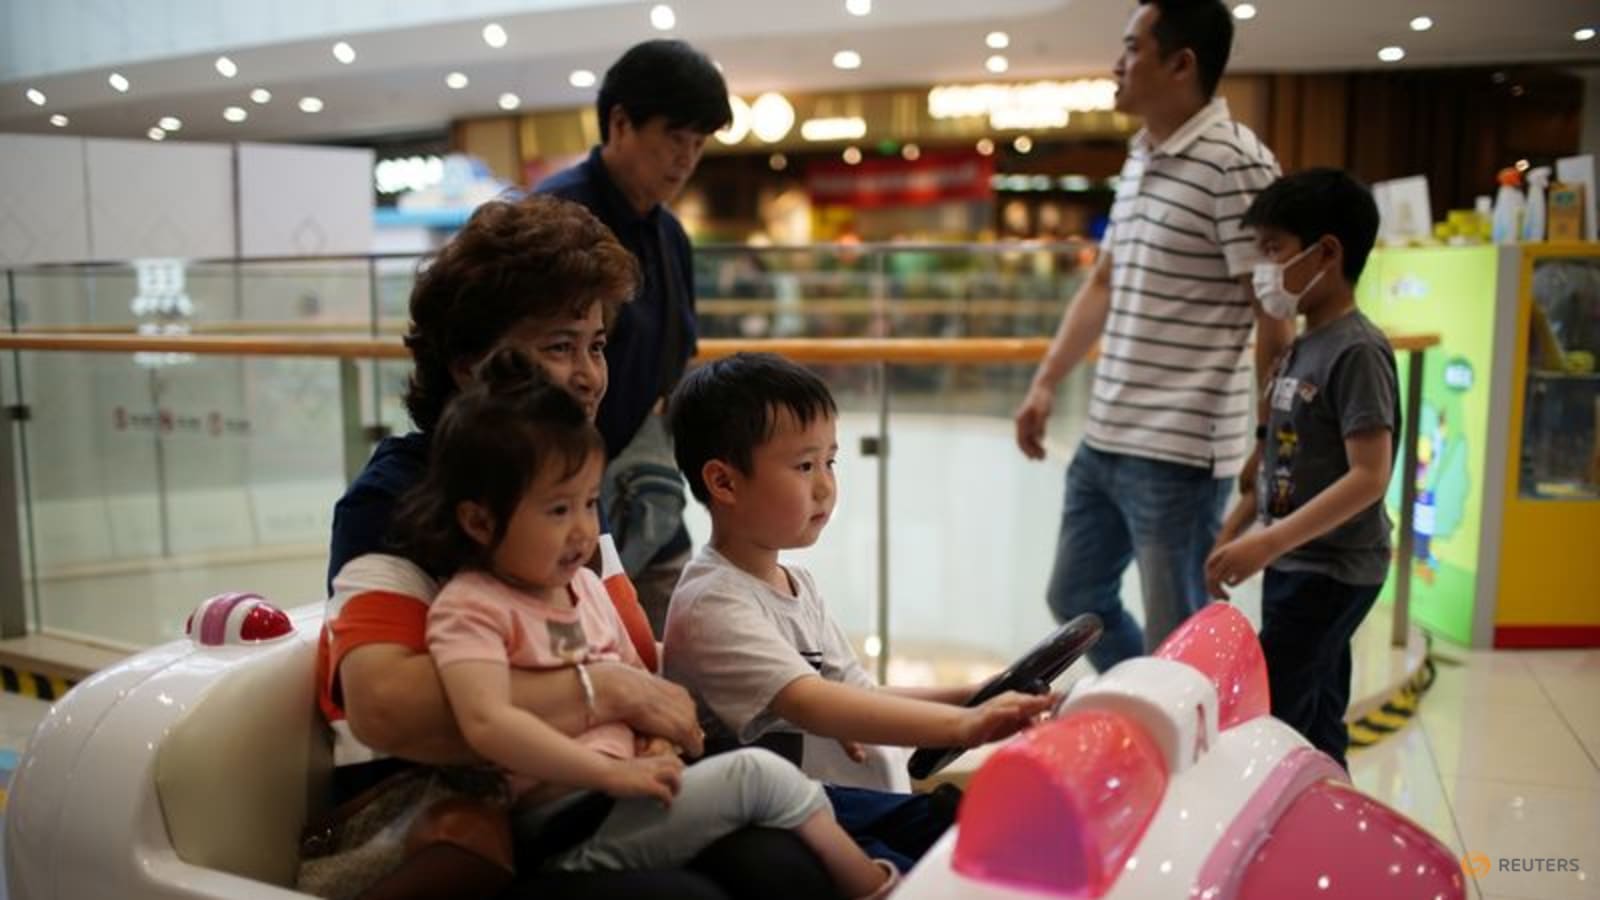 make-it-easier-to-raise-children,-say-many-in-china-after-population-falls